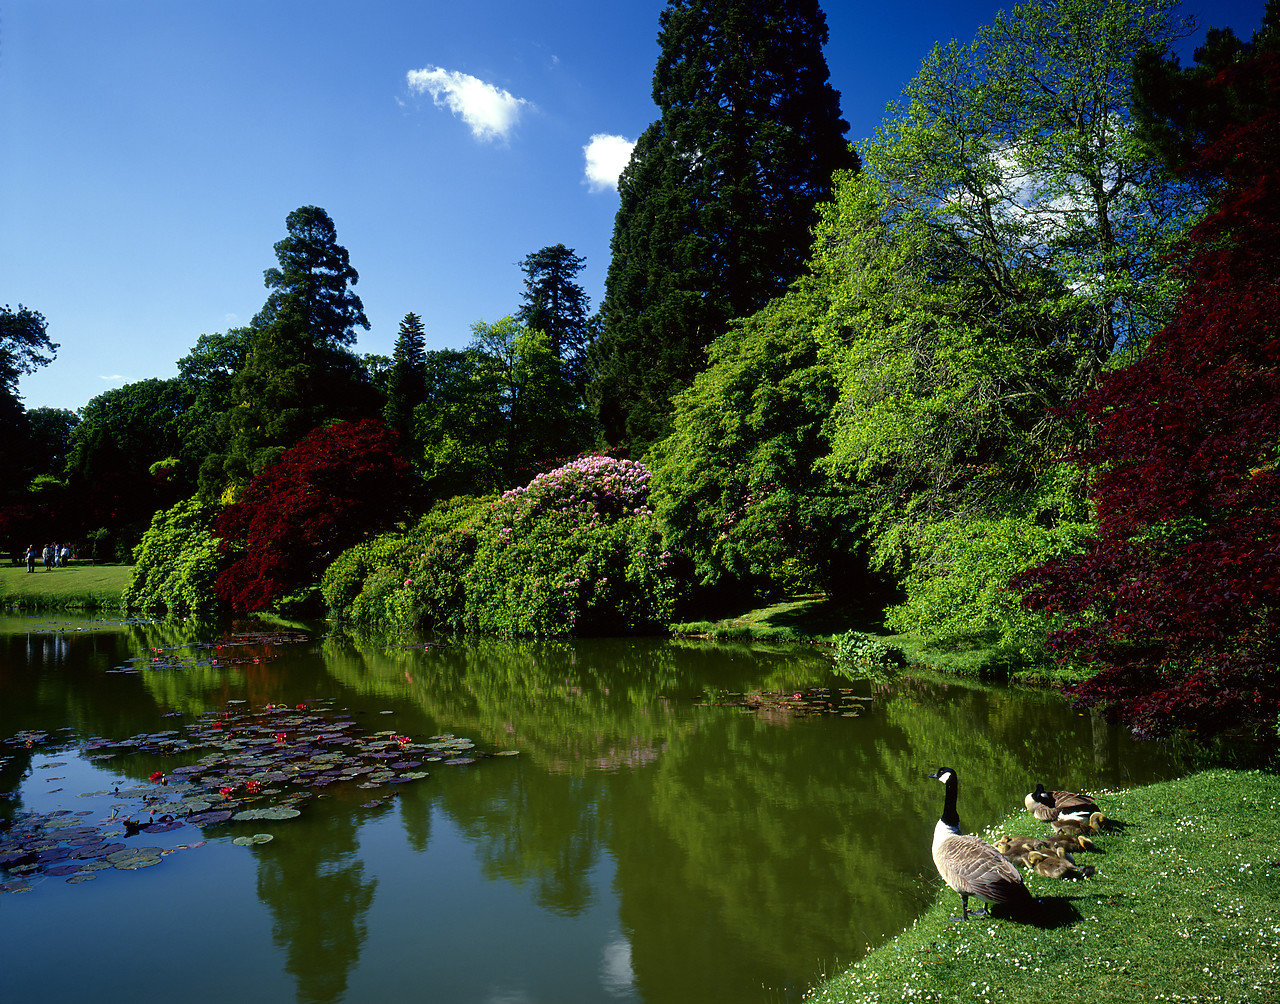 #87939-1 - Geese beside Lake, Sheffield Park Gardens, East Sussex, England